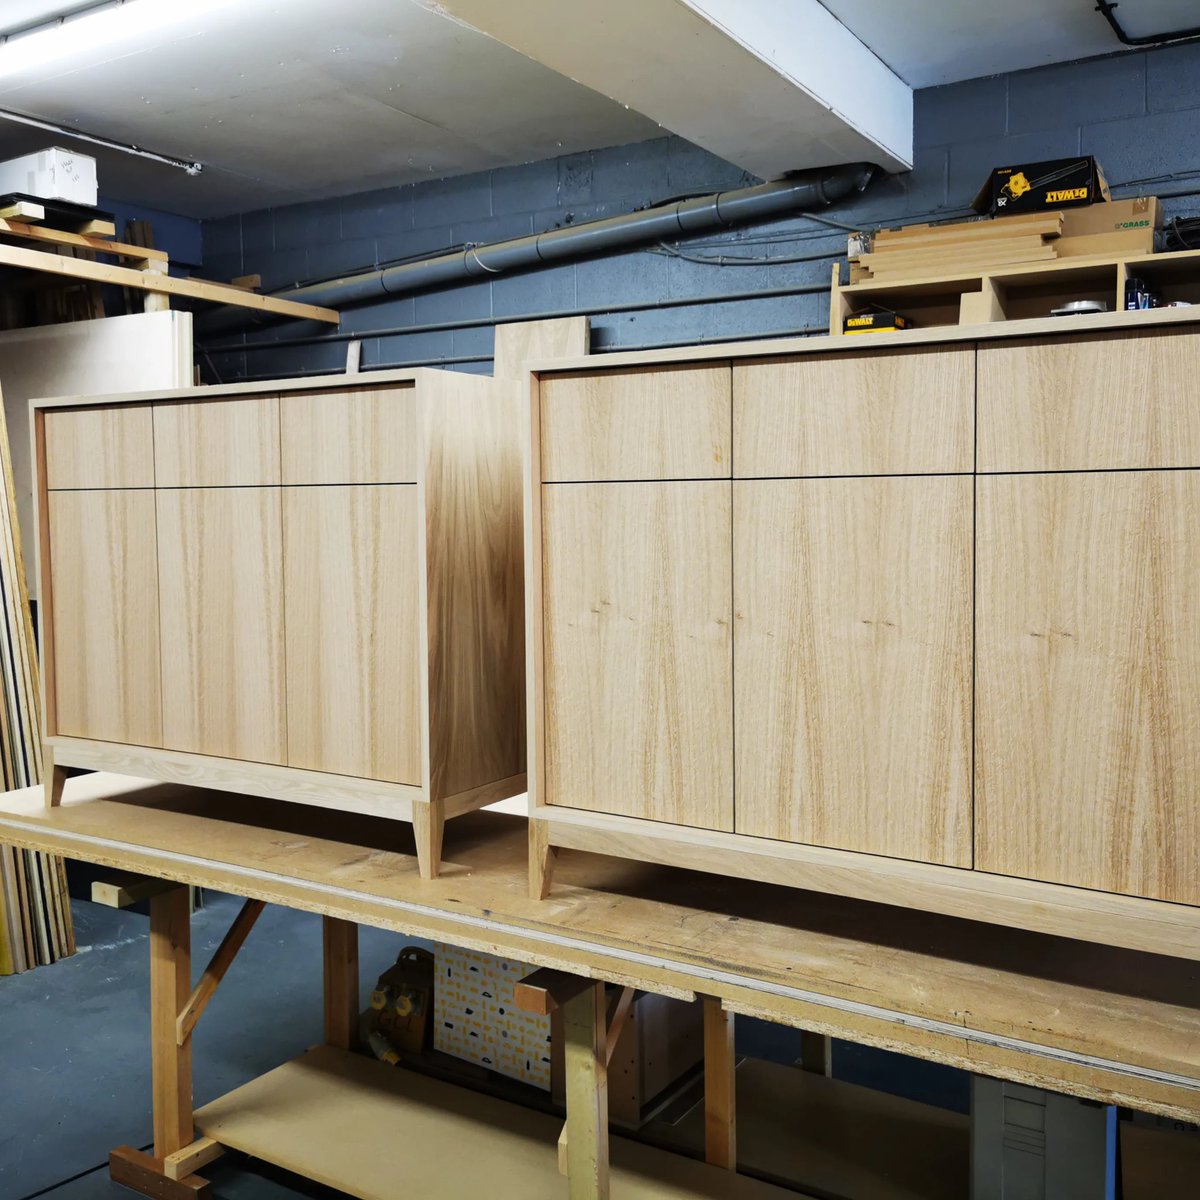 Oak veneered mdf units recently made #Retail #joinery #fitout